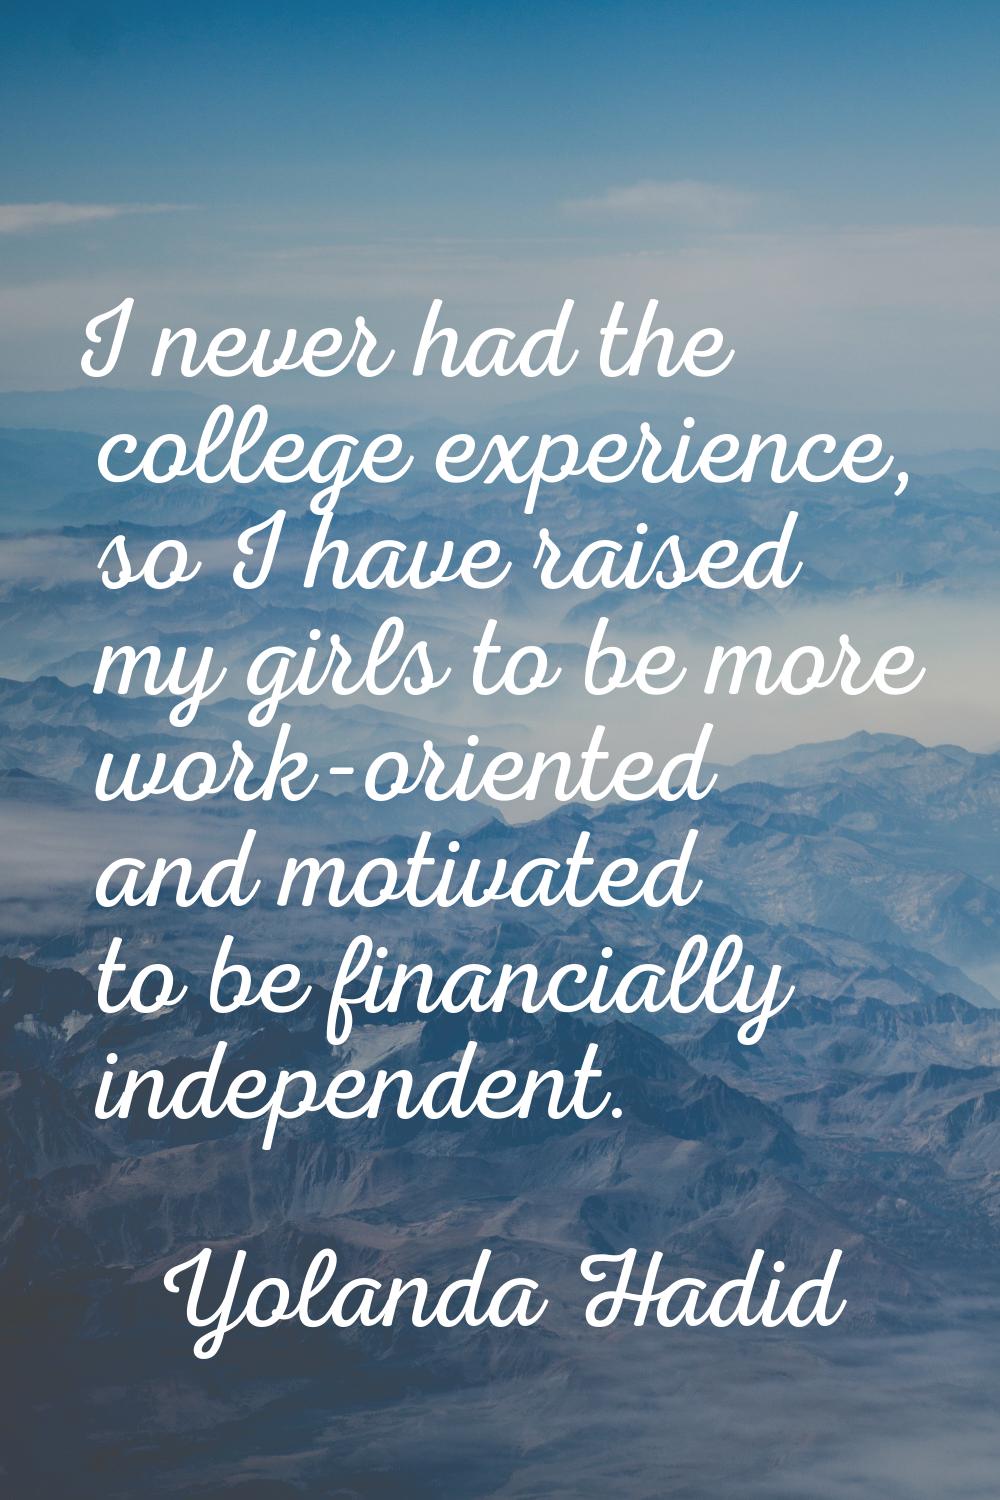 I never had the college experience, so I have raised my girls to be more work-oriented and motivate